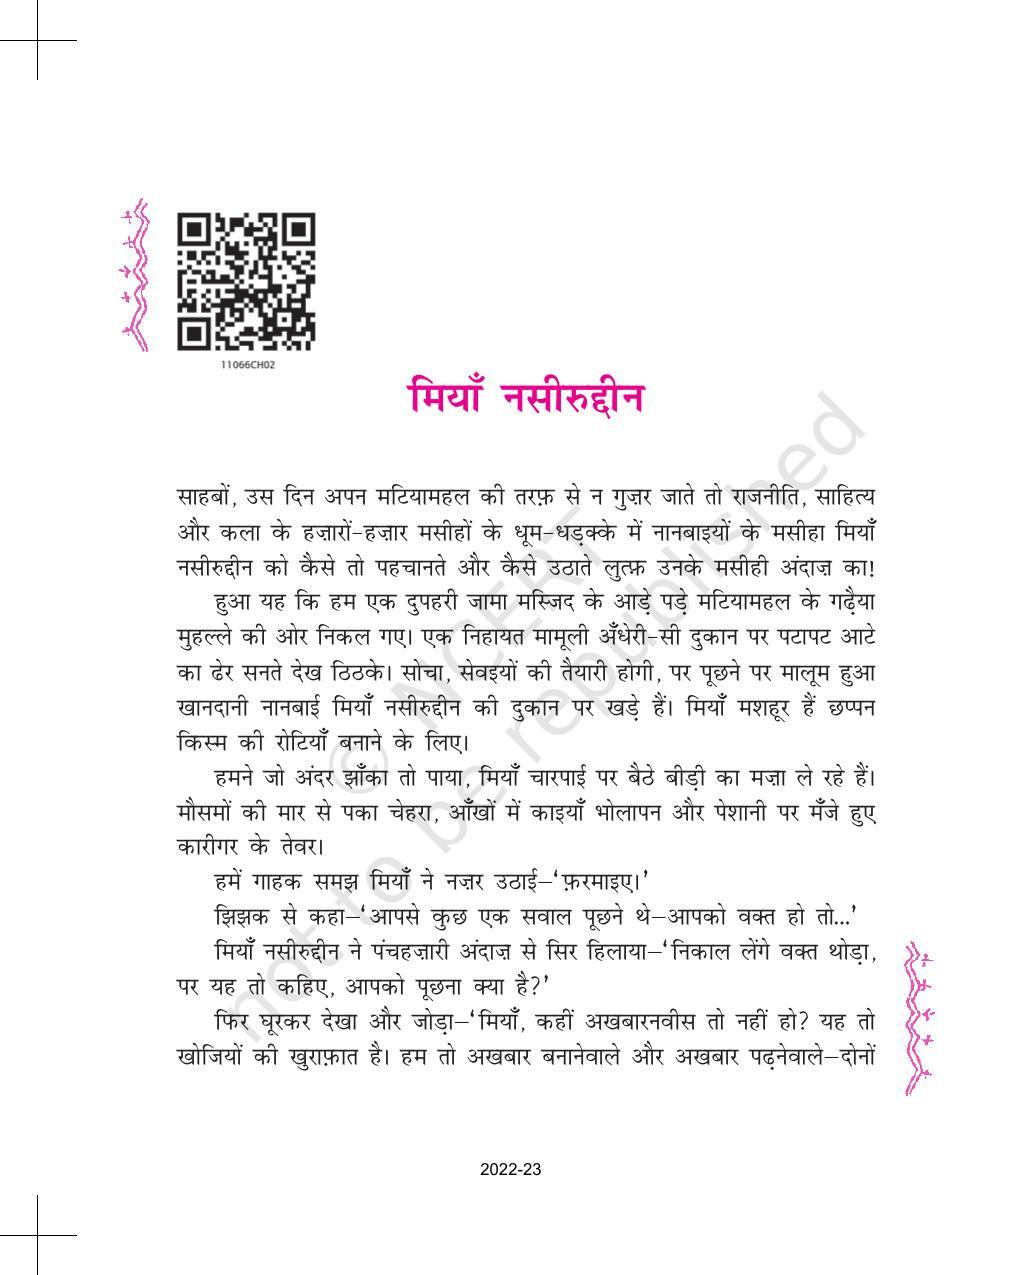 NCERT Book for Class 11 Hindi Aroh Chapter 2 मियाँ नसीरुद्दीन - Page 3